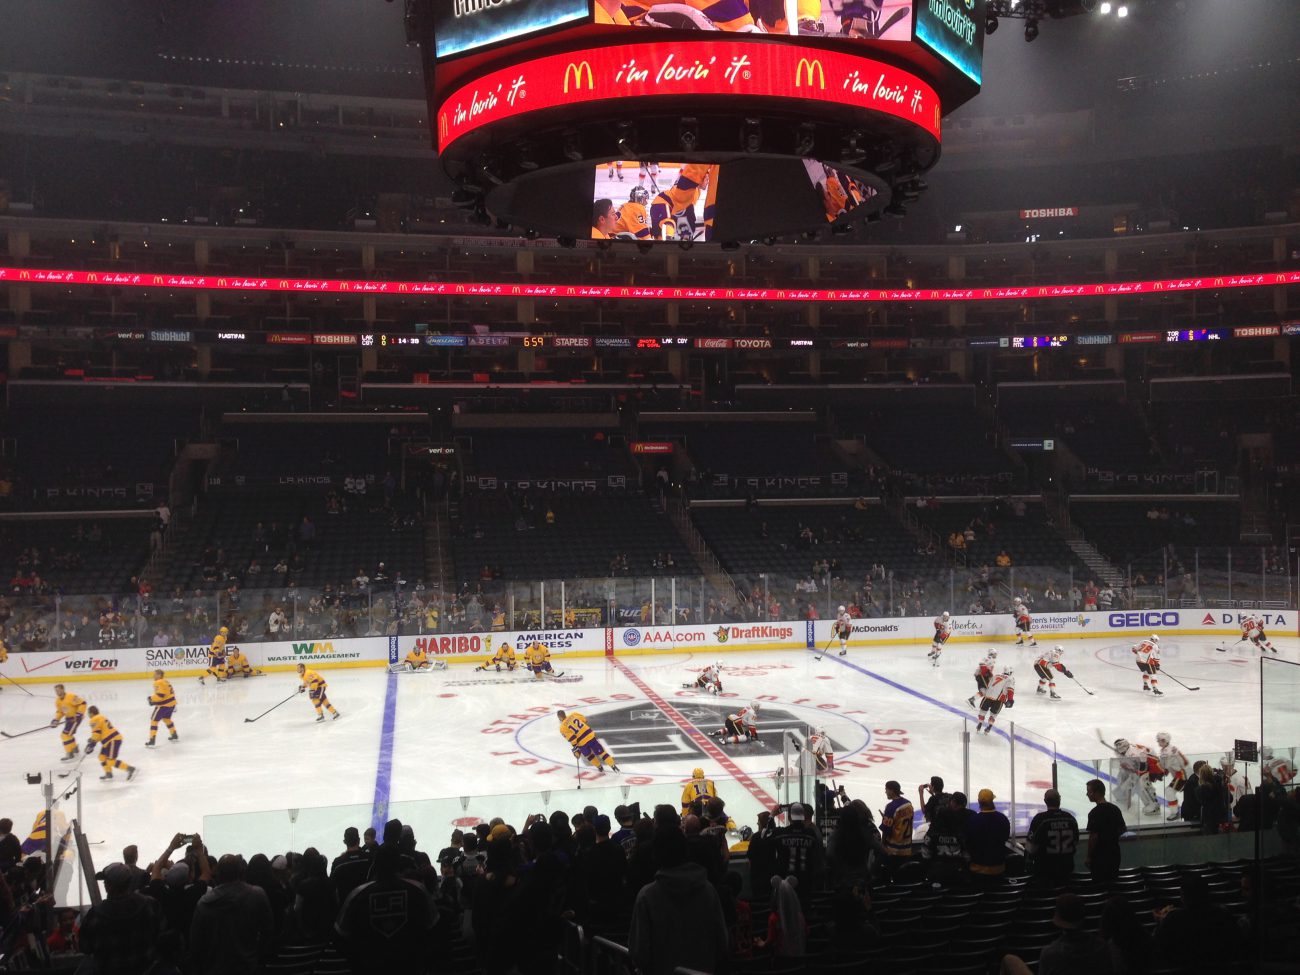 Staples Center Seating Guide, Los Angeles Lakers, Clippers